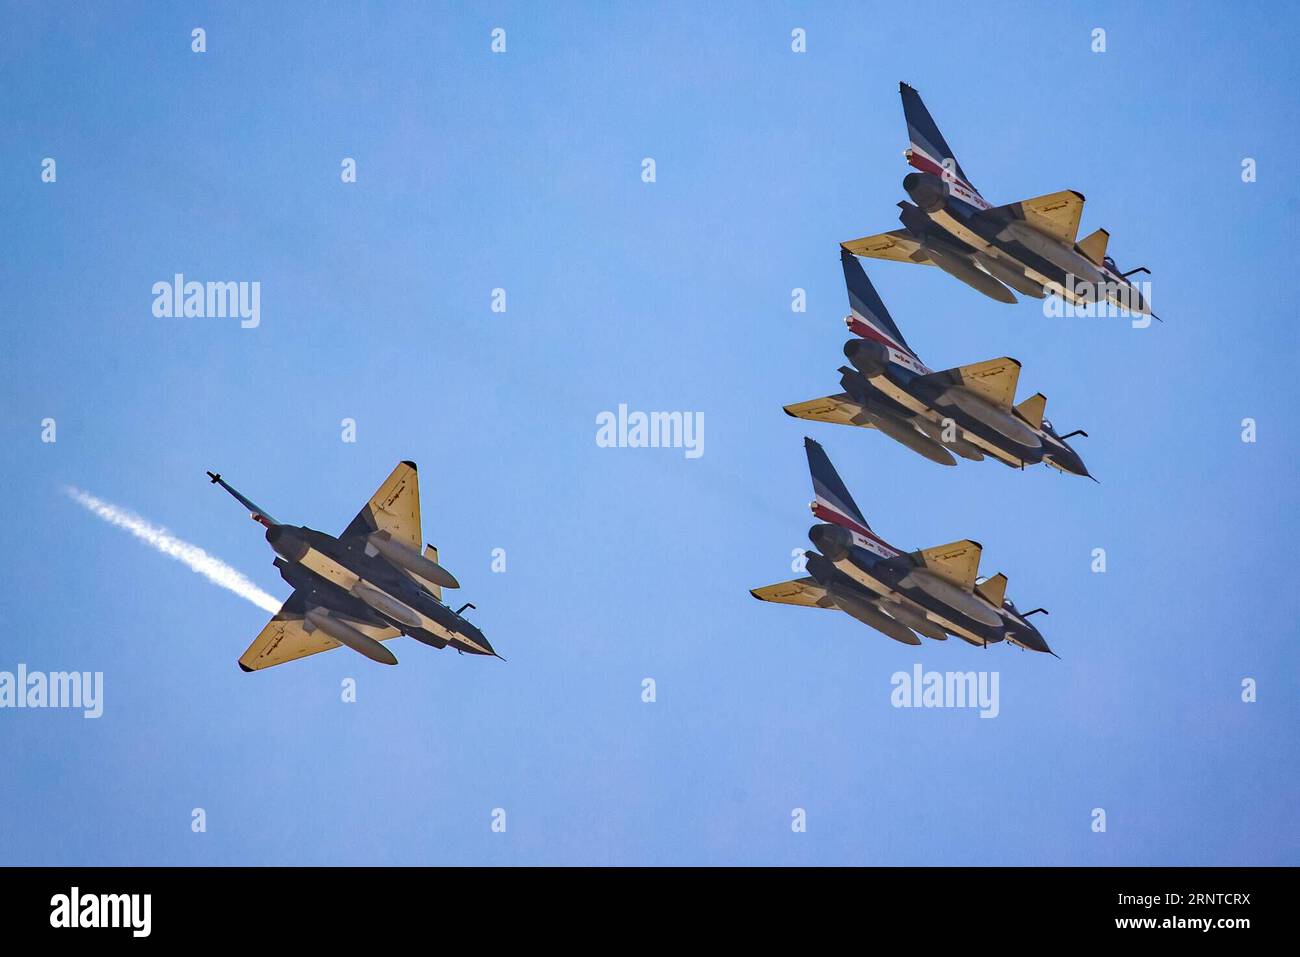 (171106) -- URUMQI, Nov. 6, 2017 -- Photo taken on Nov. 5, 2017 shows J-10 aerobatic fighter jets of the Chinese Air Force s August 1st Air Demonstration Team in China. The Chinese Air Force s August 1st Air Demonstration Team on Monday left for the United Arab Emirates (UAE) to take part in the Dubai Airshow, which is scheduled to last from Nov. 12-16. The team will also visit Pakistan after the airshow and stage aerobatic performances there on Nov. 20, according to the Chinese People s Liberation Army Air Force. )(mcg) CHINA-PLA-AIR DEMONSTRATION TEAM (CN*) Yangxpan PUBLICATIONxNOTxINxCHN Stock Photo